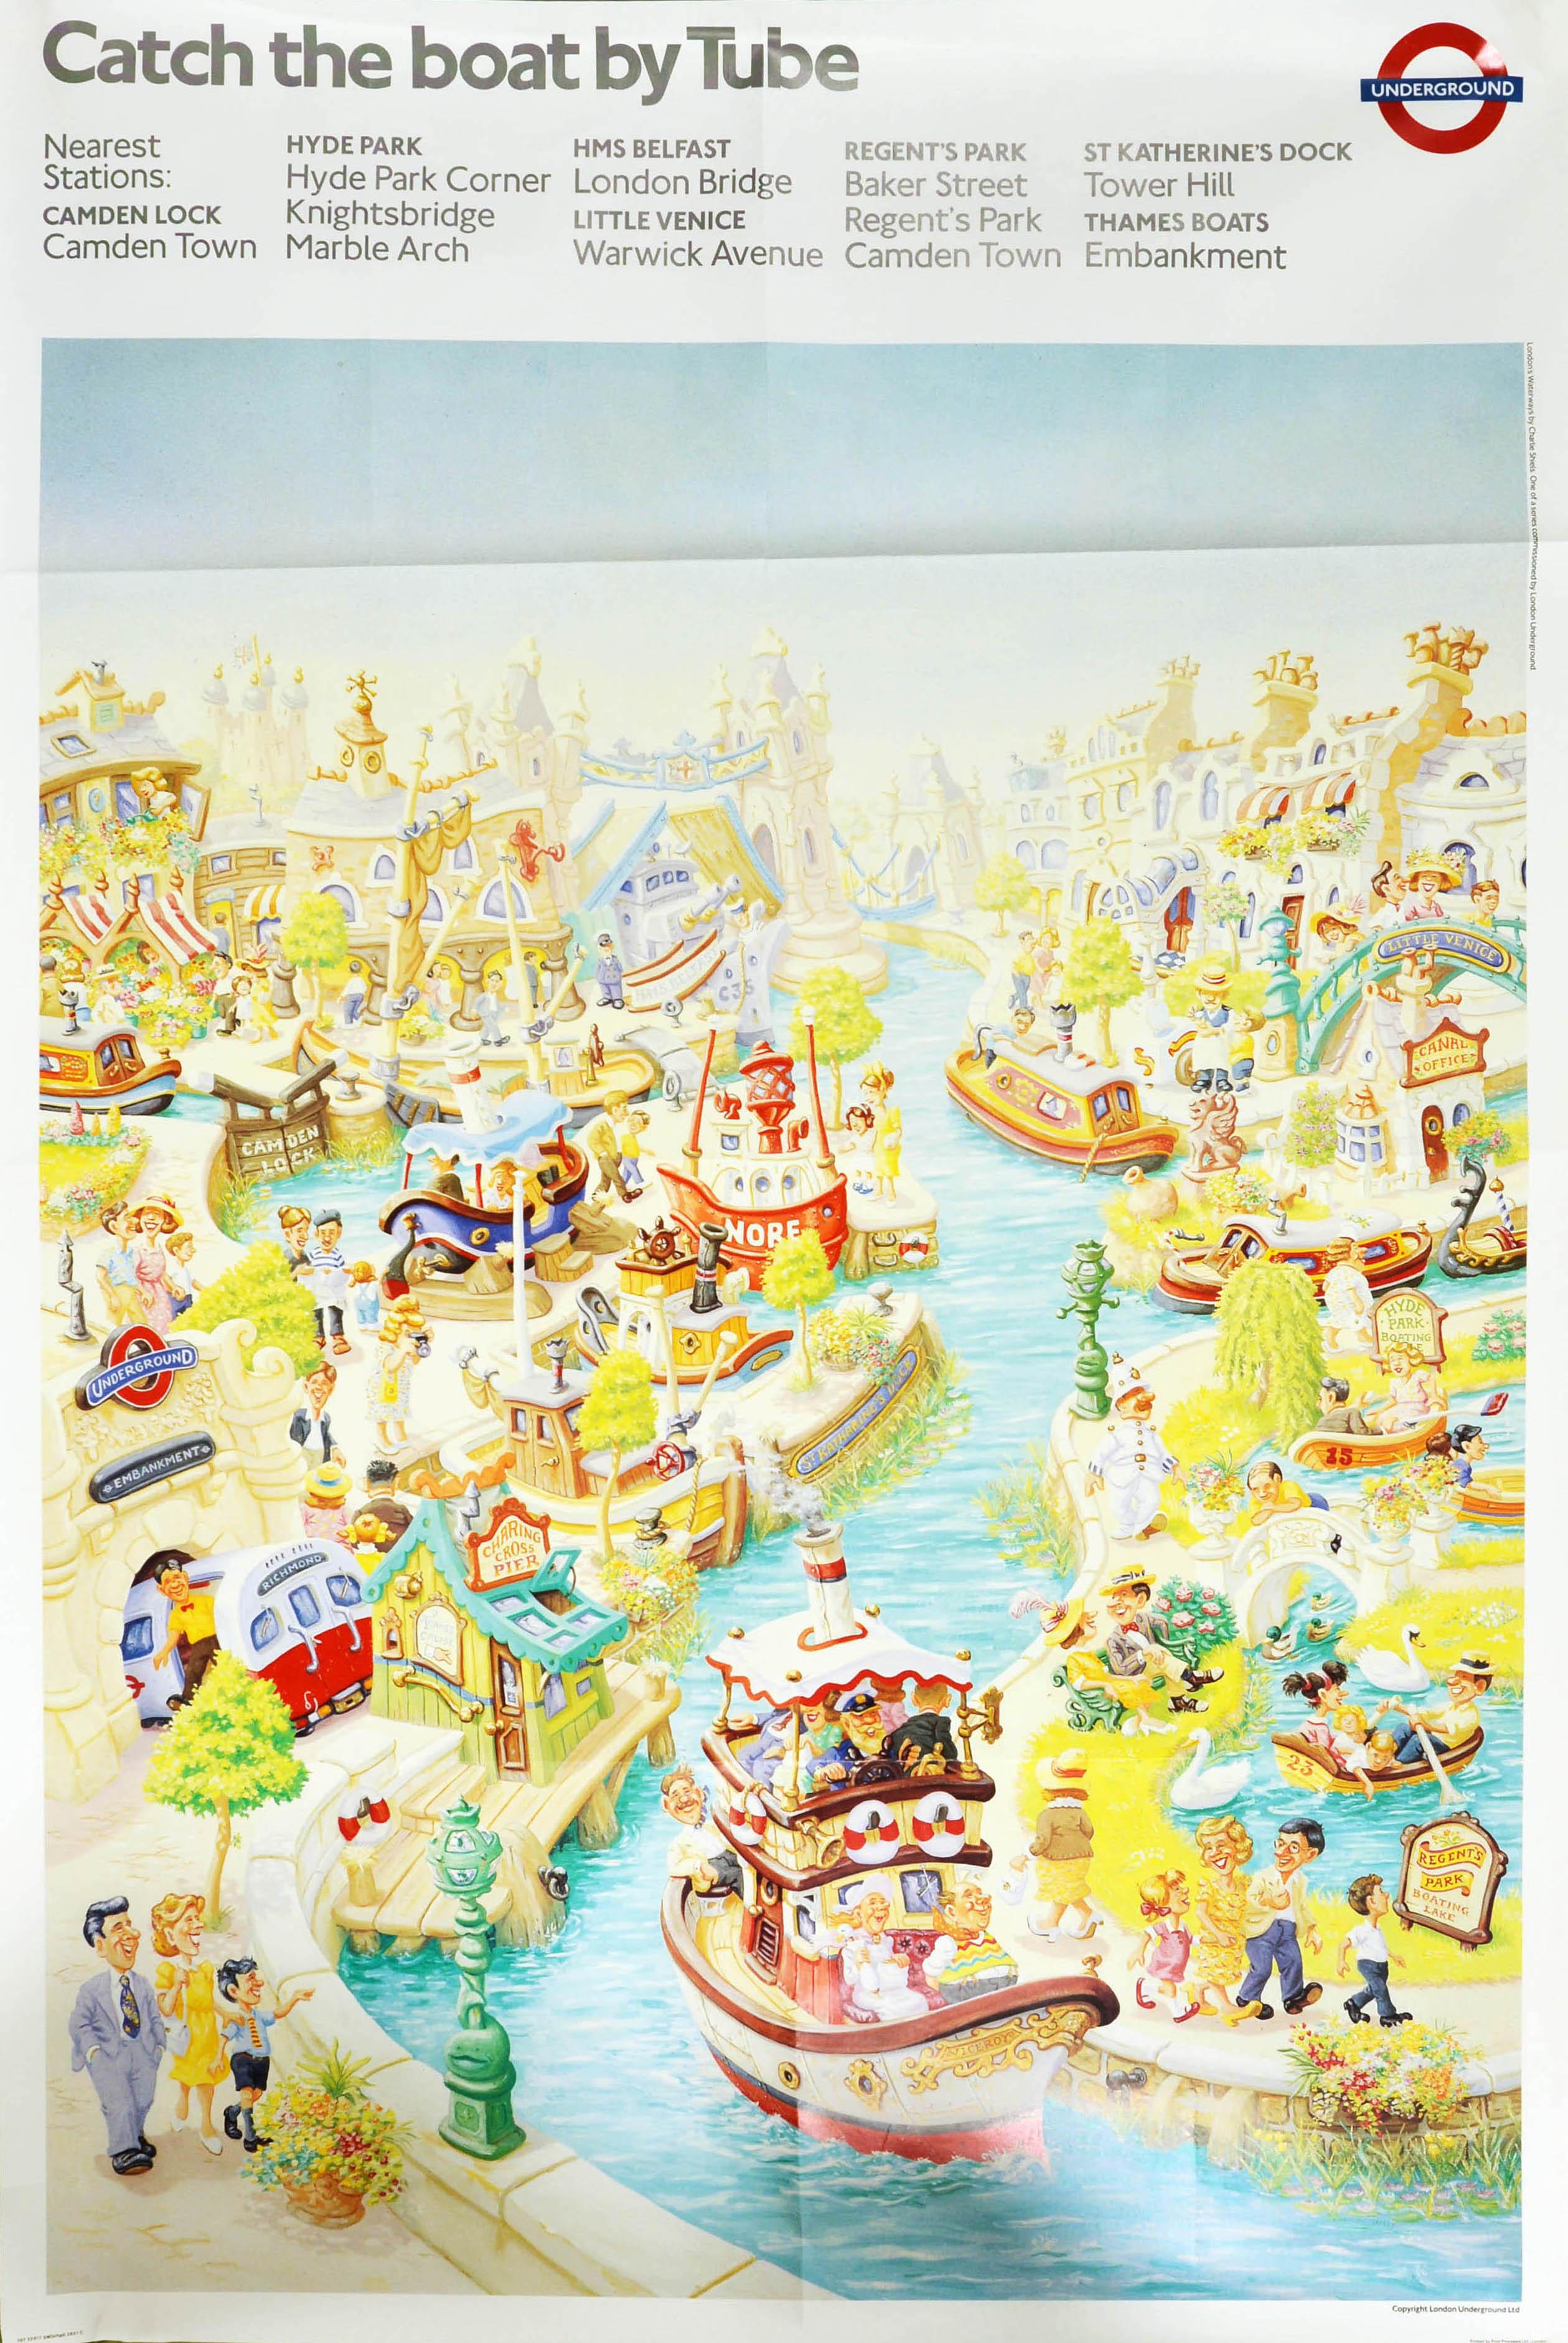 Unknown Print - Original Vintage London Underground Poster Catch The Boat By Tube Thames Design